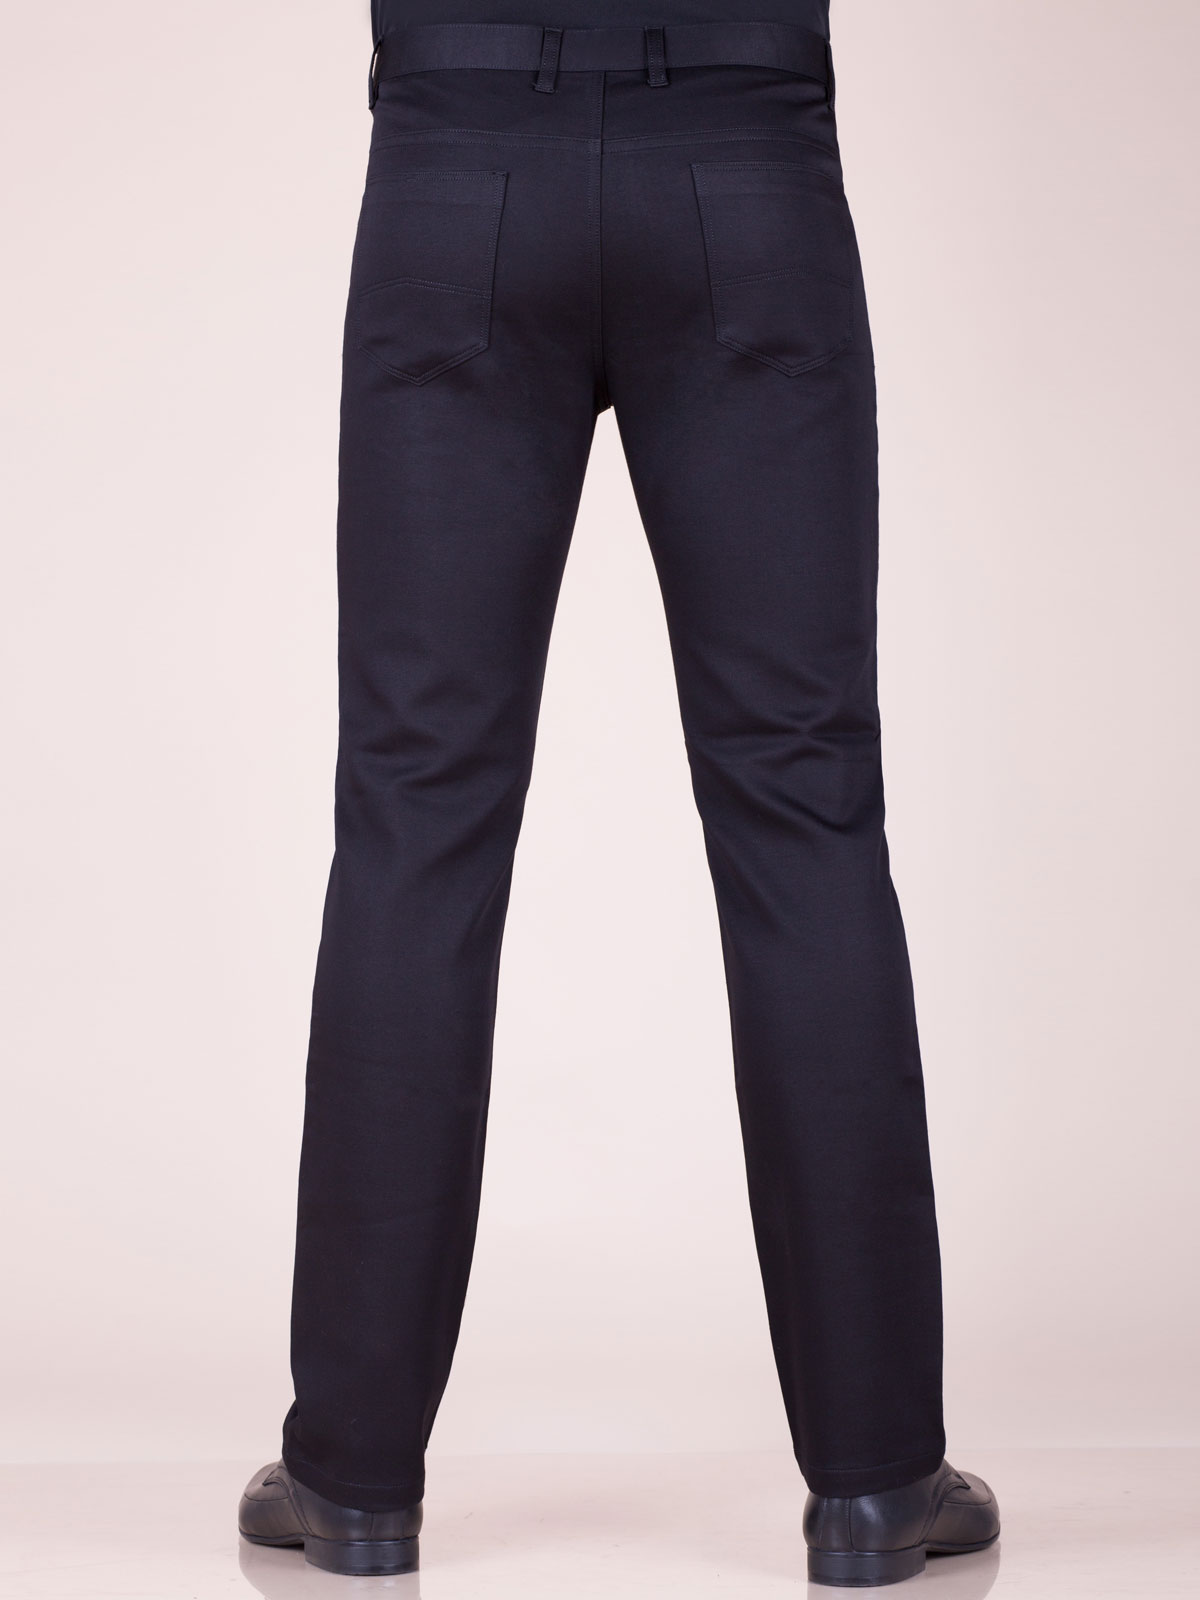 Black pants with five pockets - 60240 € 18.56 img2